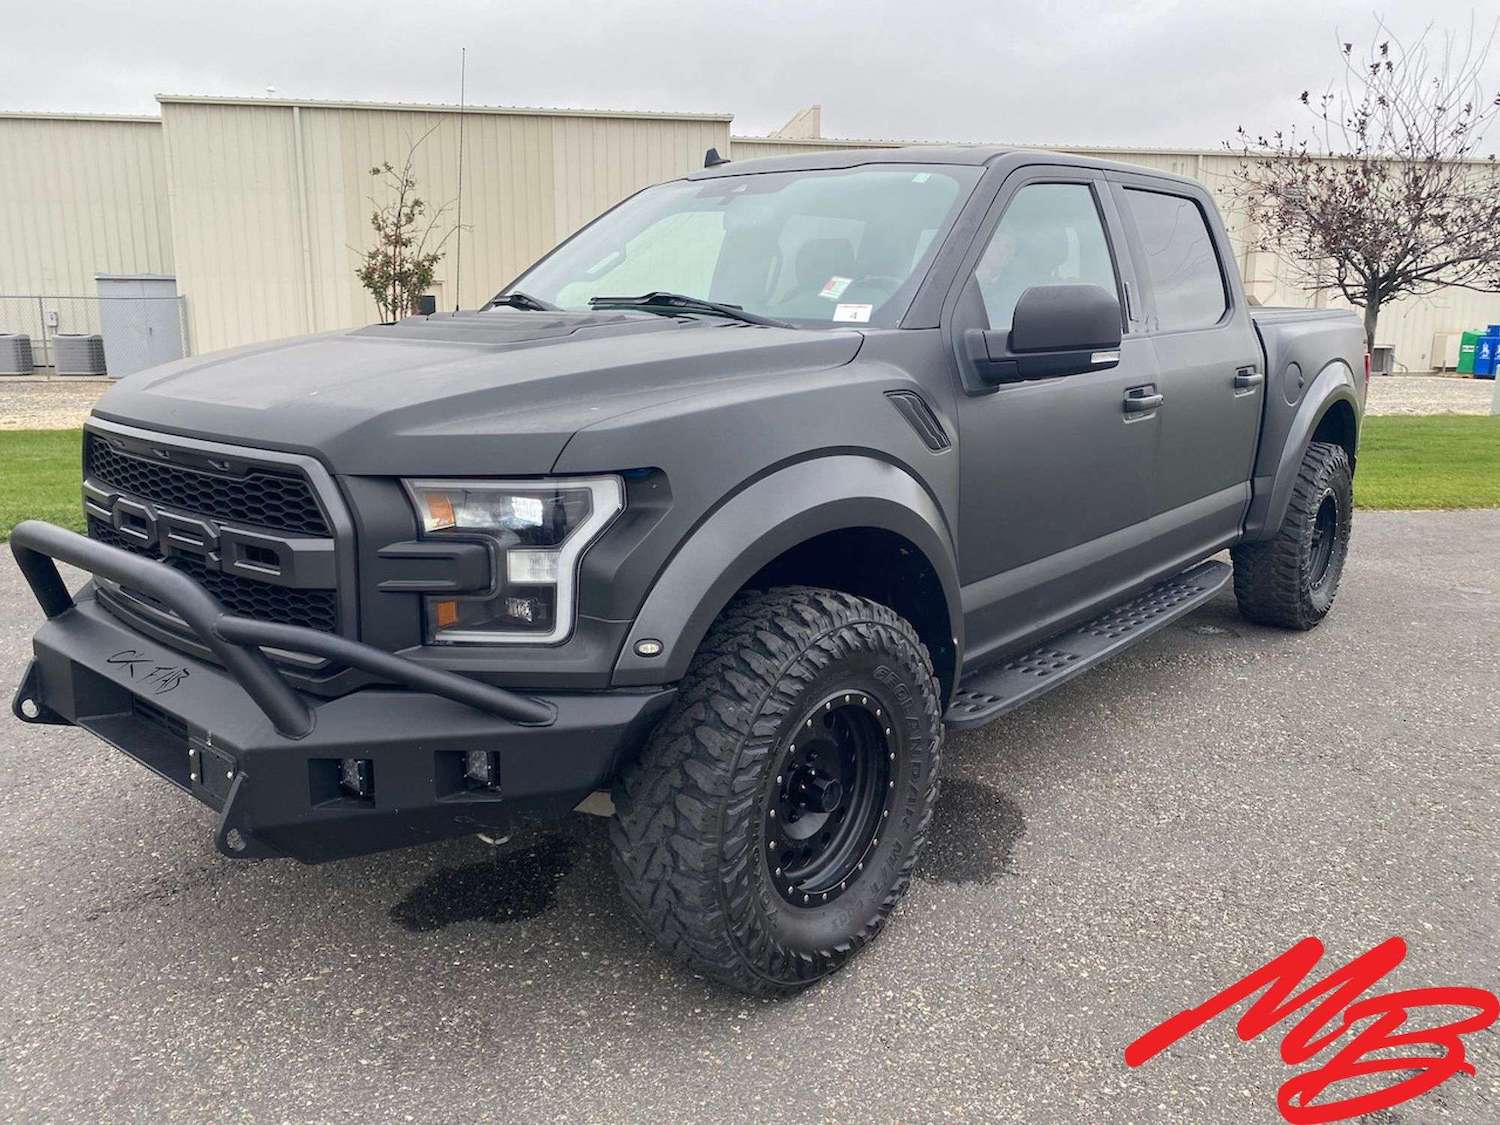 Kanye West's 2019 Ford F-150 Raptor 4x4 SuperCrew from Cody, Wyoming now up for auction from Musser Bros.